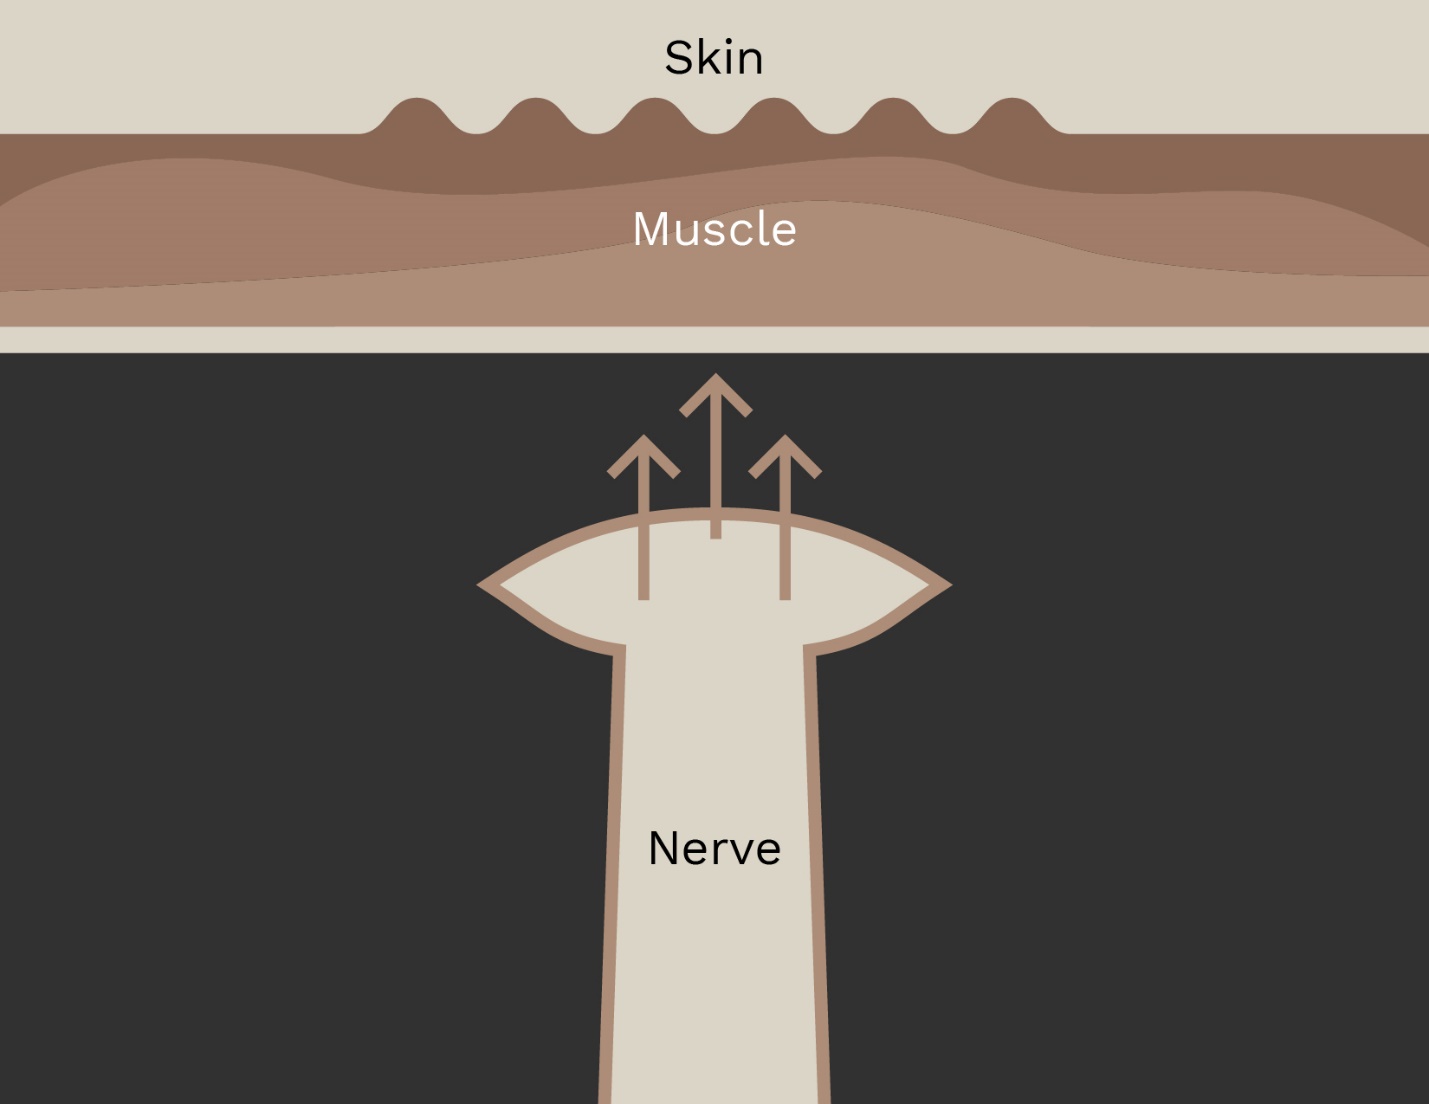 Nerves signal muscles to contract, thereby wrinkling the skin's surface.